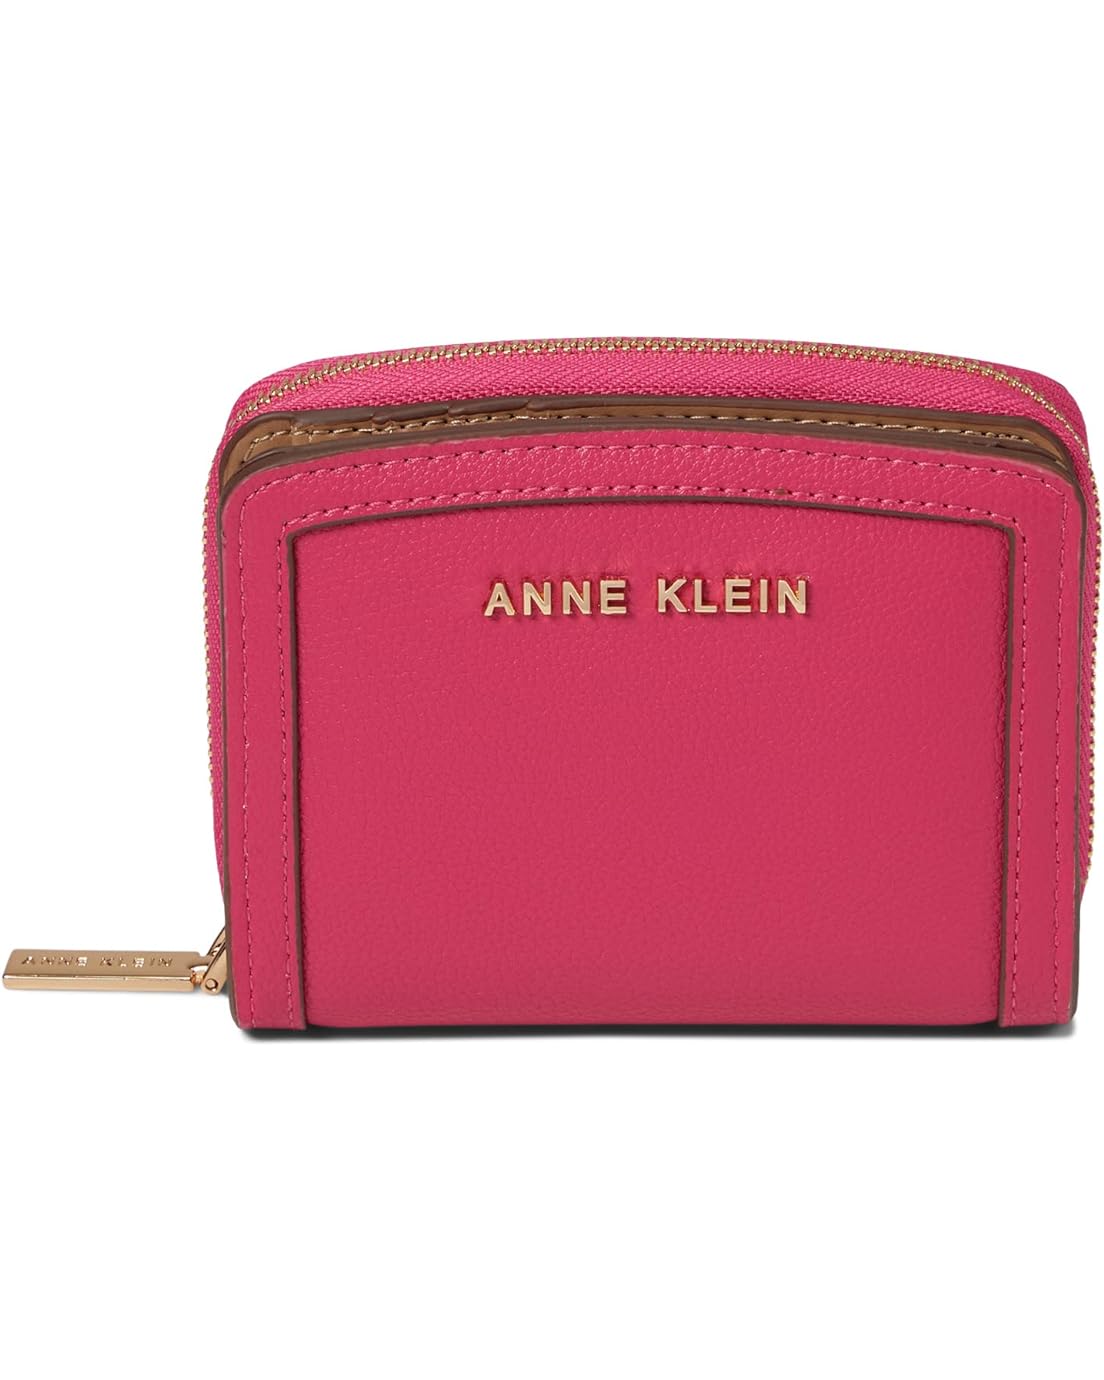 Anne Klein Small Curved Wallet